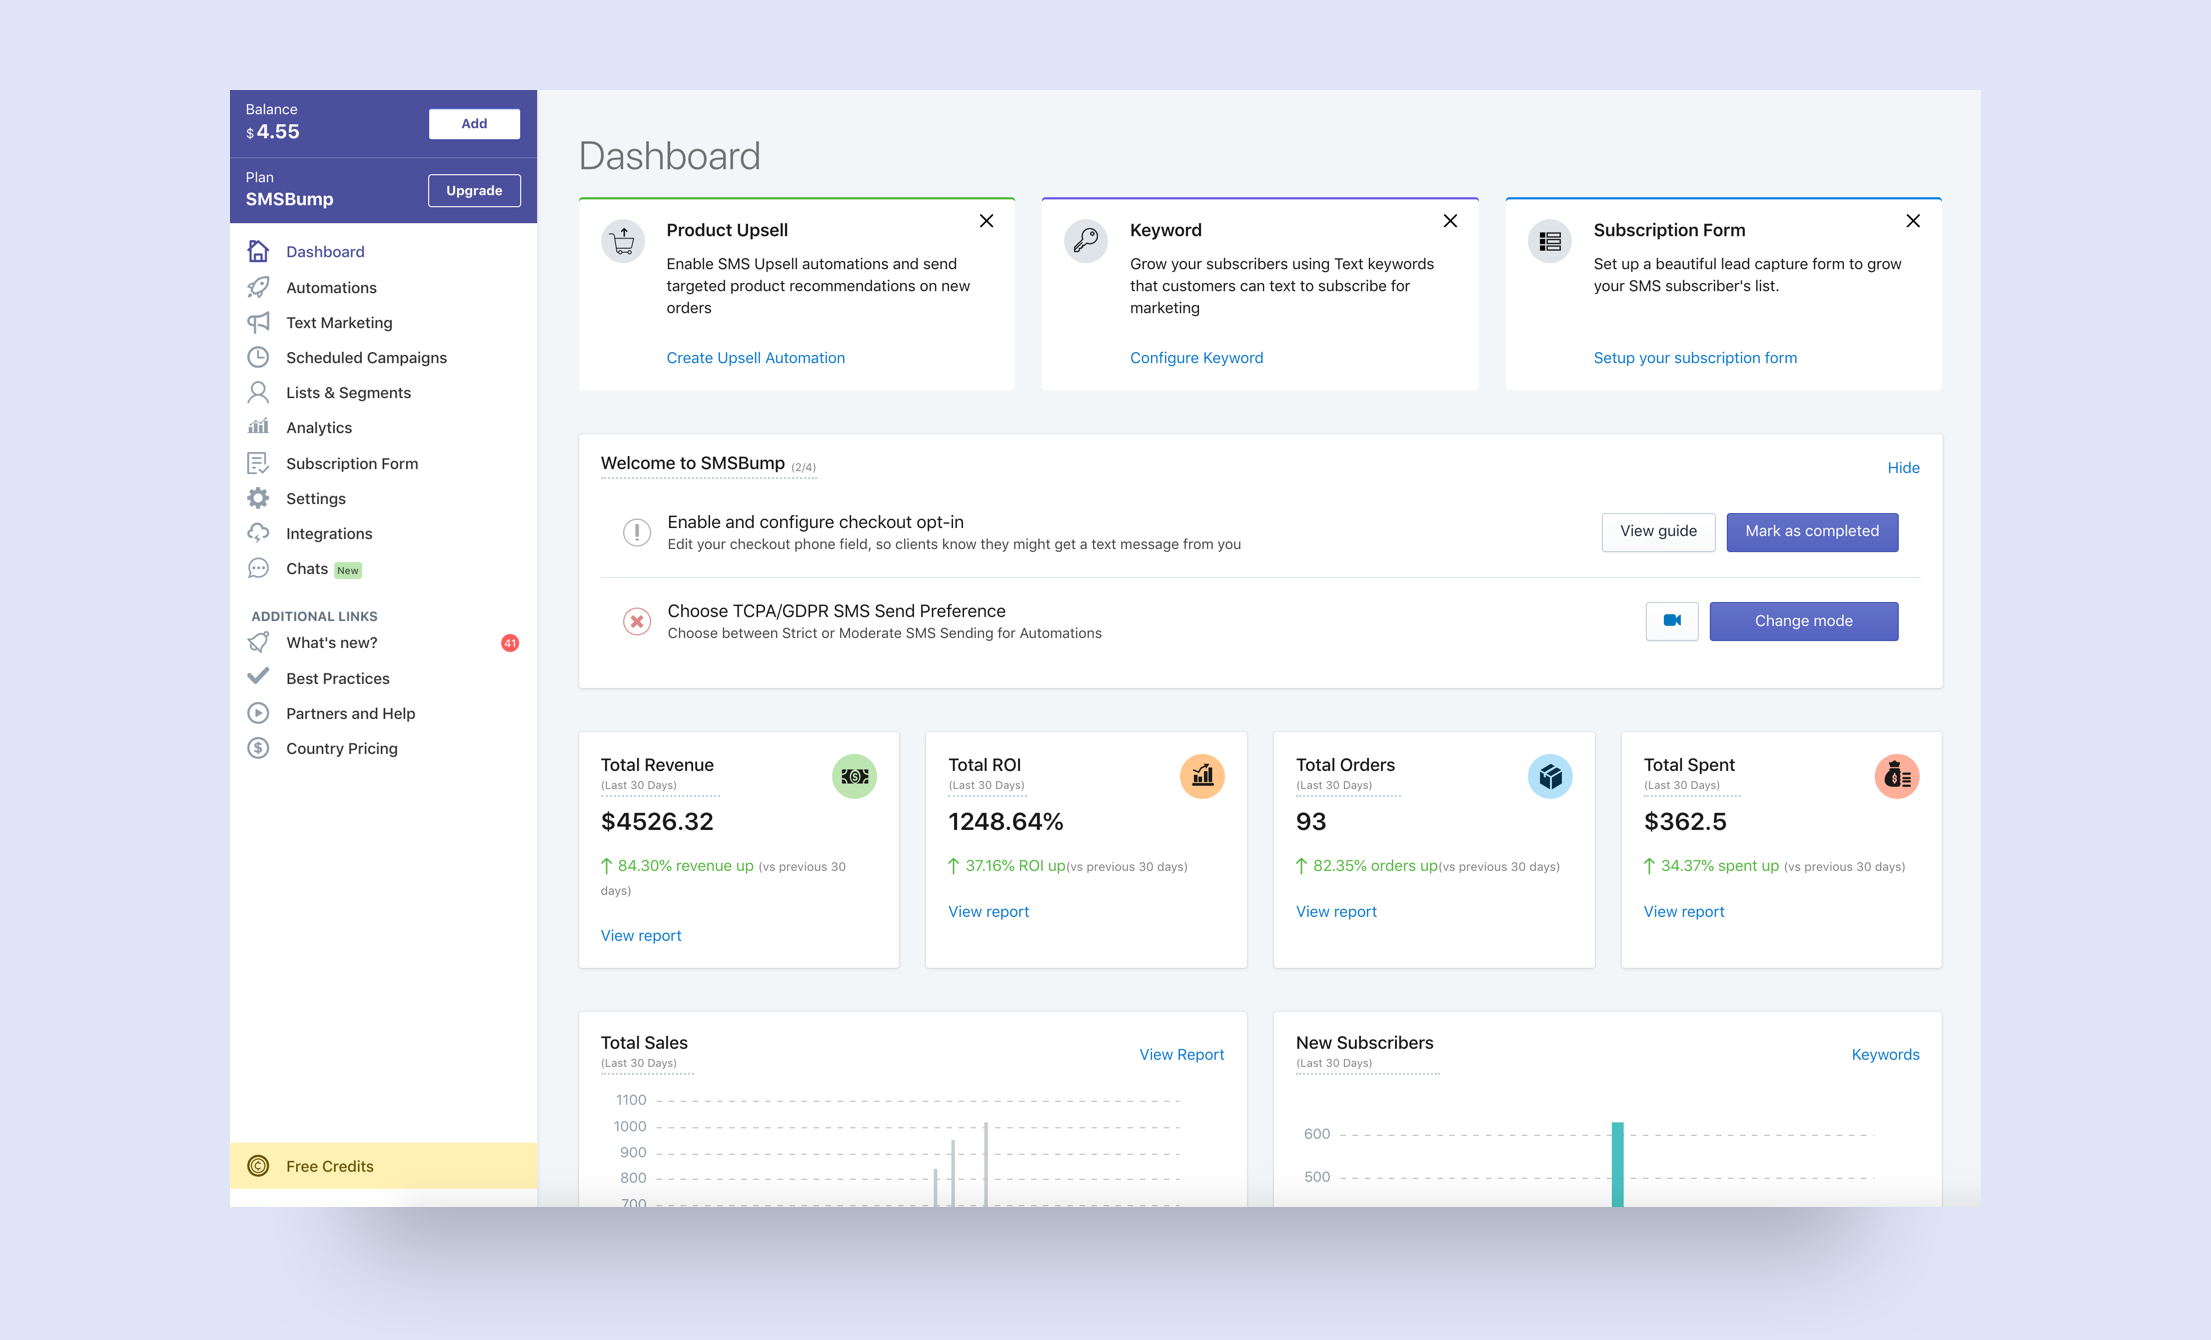 SMSBump Dashboard: Introducing the Redesigned App Dashboard in Shopify